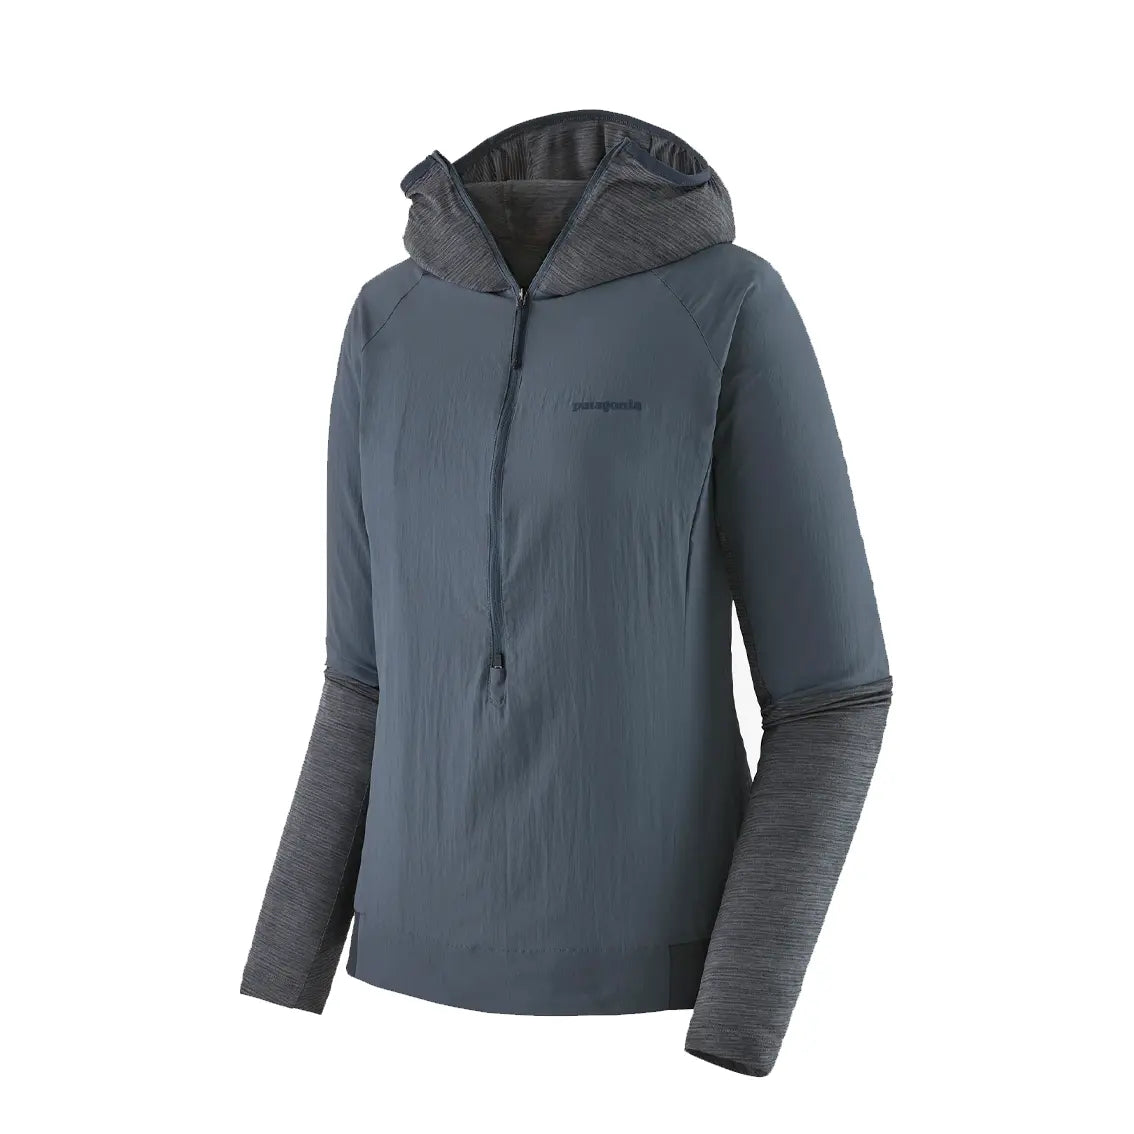 Womens Patagonia Airshed Pro Pullover - Plume Grey